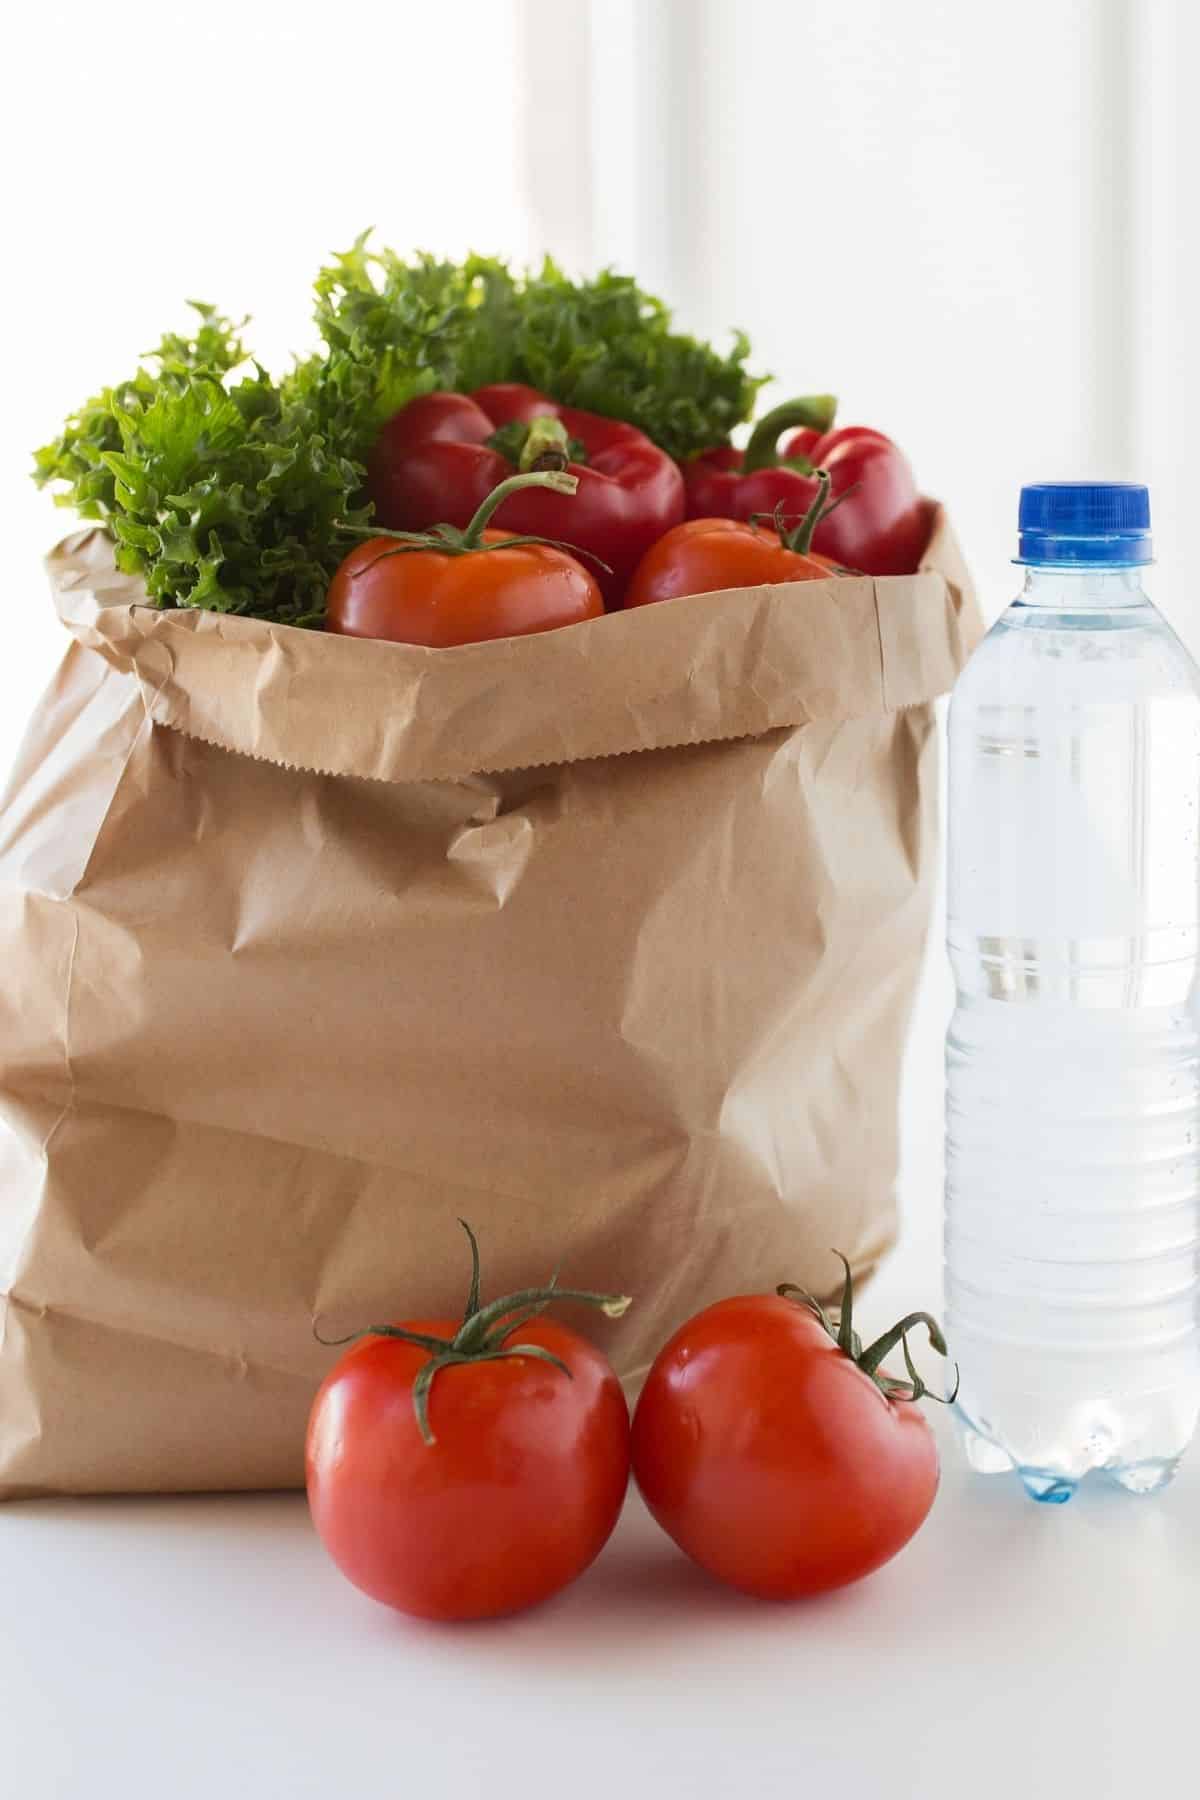 vegetables in grocery bag on a countertop with a bottle of water.